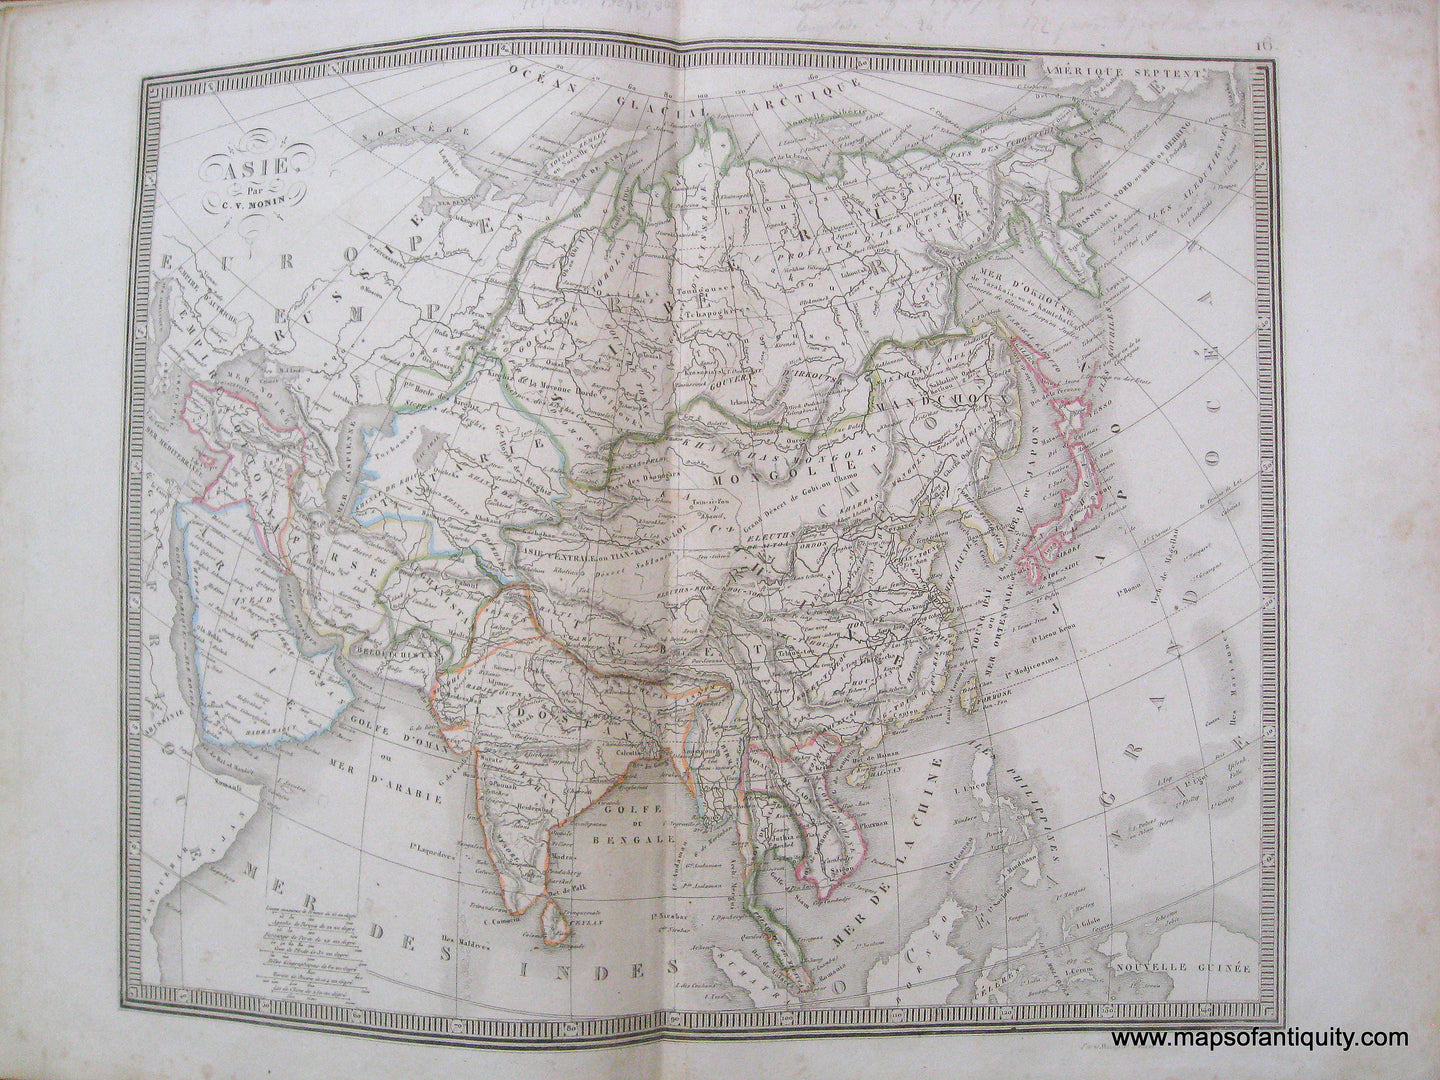 Antique-Hand-Colored-Map-Asie-(Asia-1846-Monin-1800s-19th-century-Maps-of-Antiquity